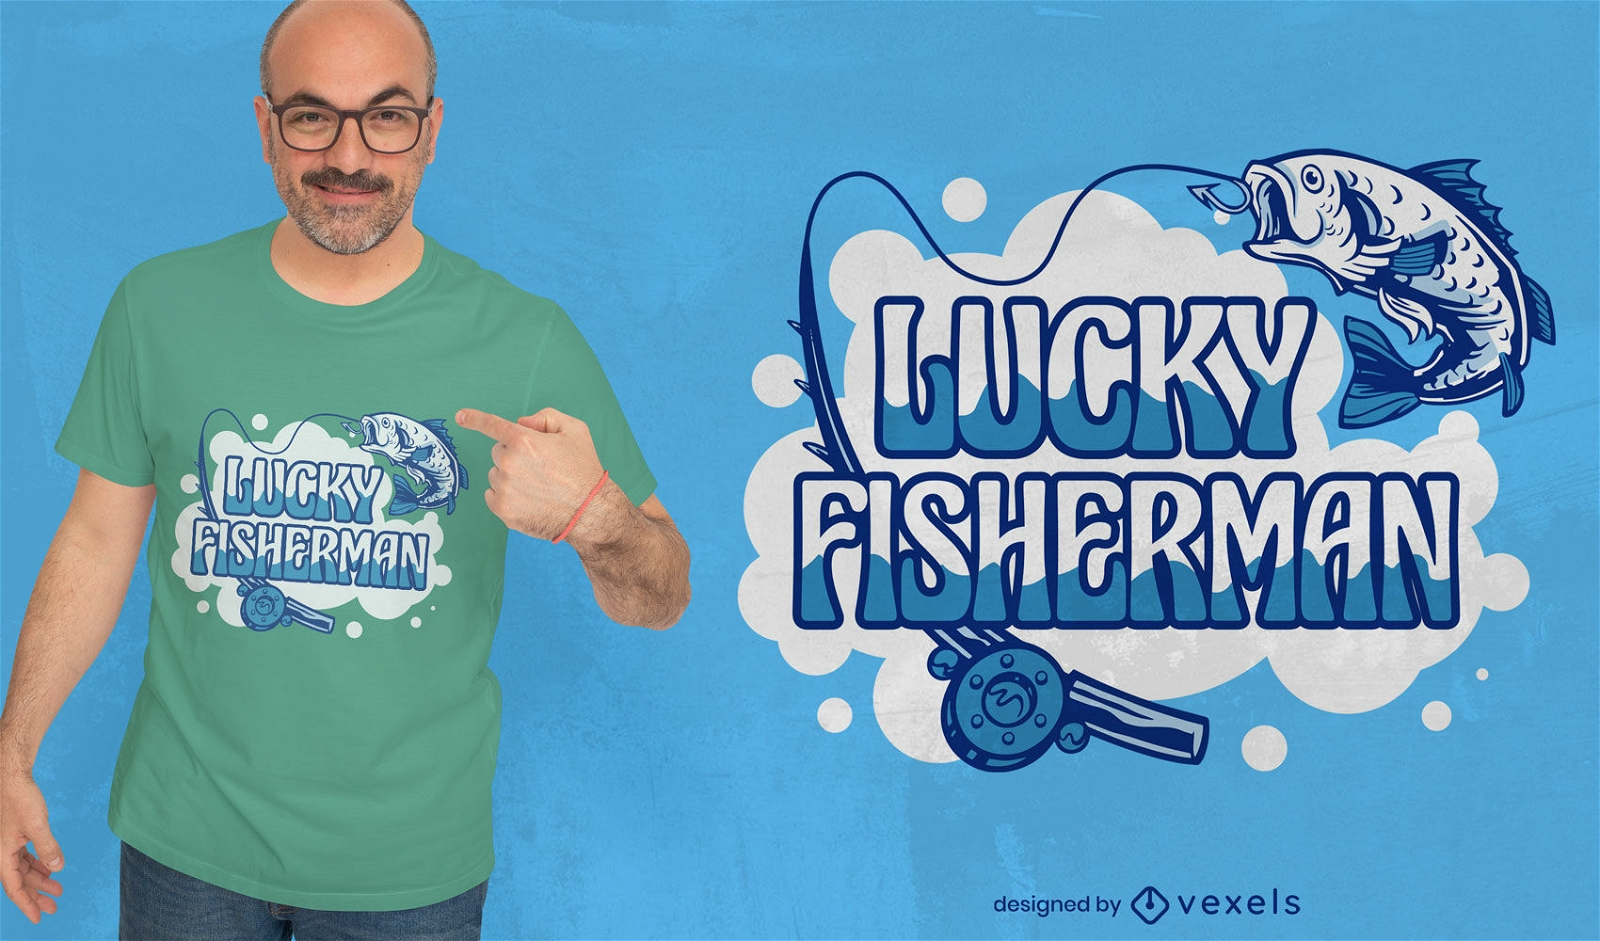 Fishing rod and fish quote t-shirt design